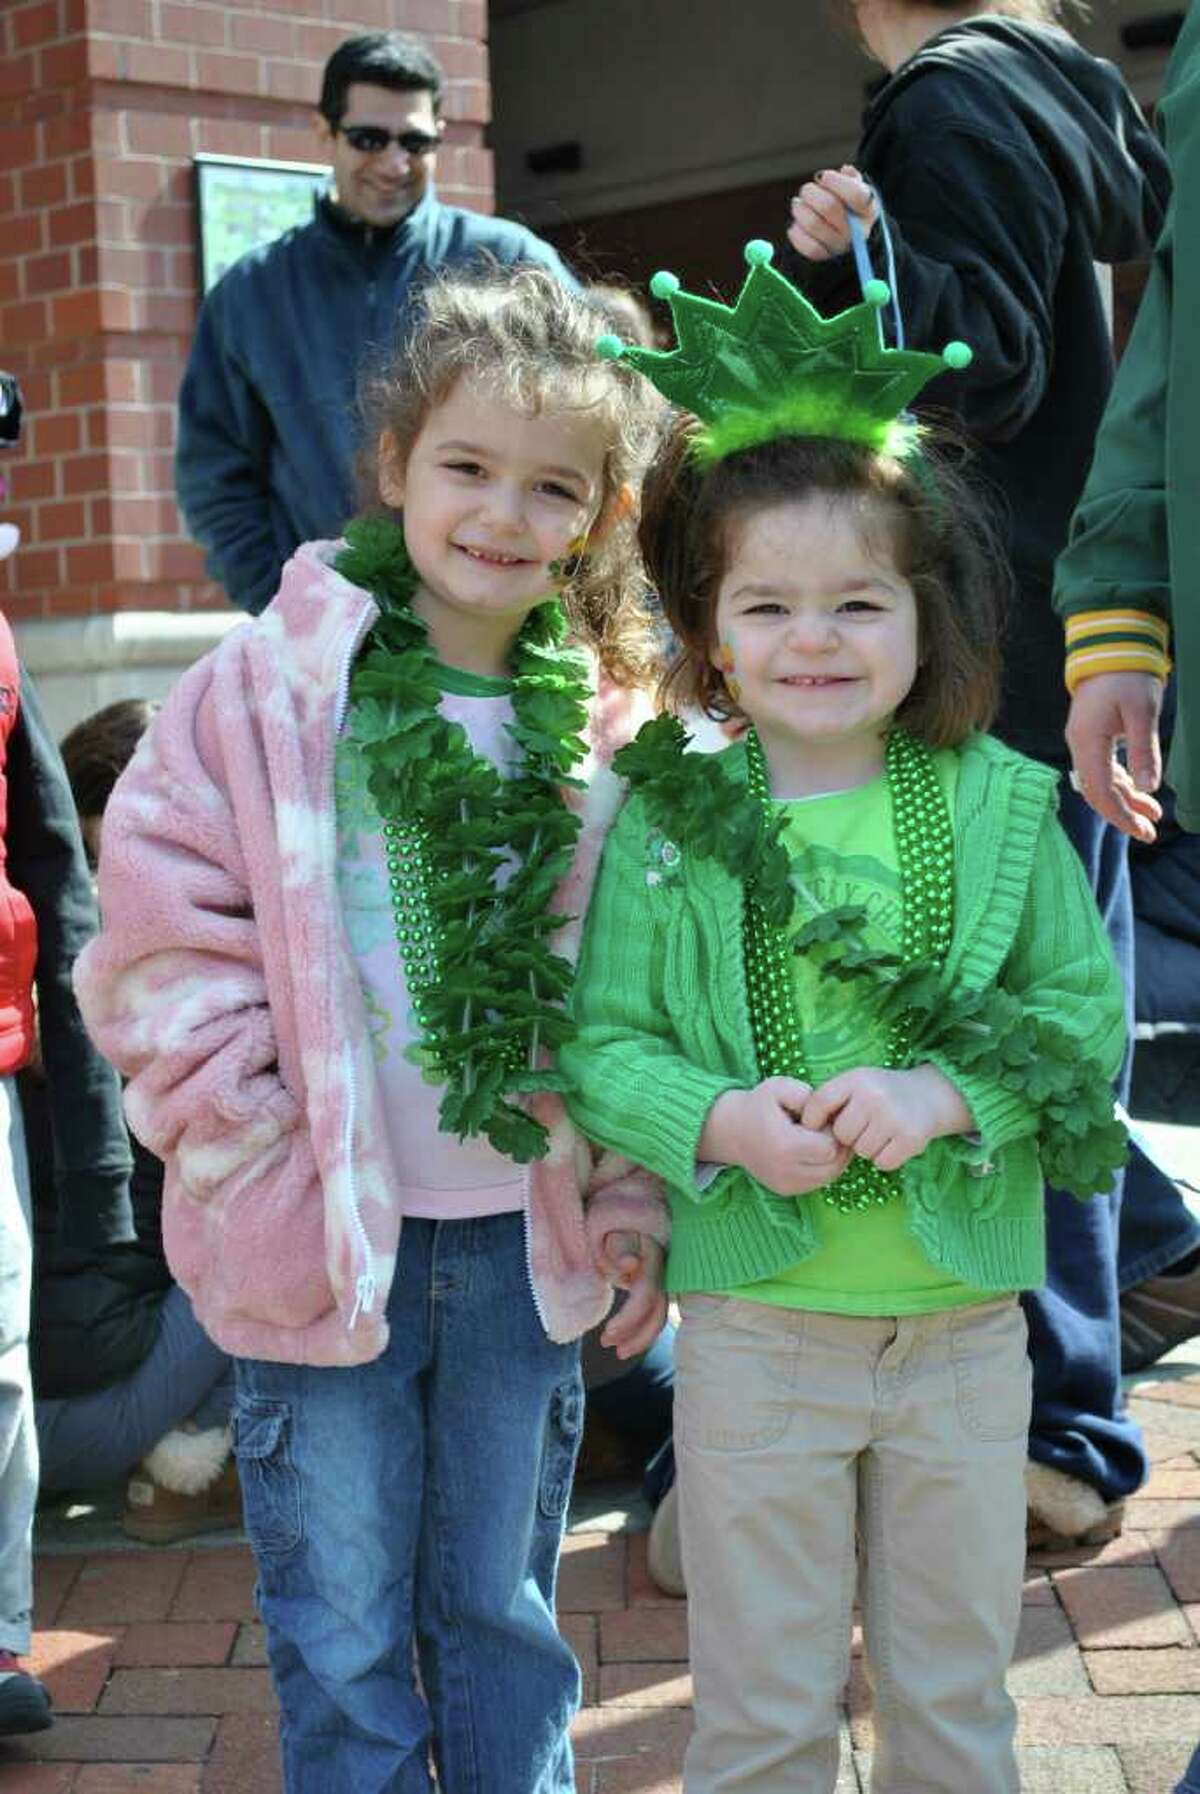 St. Patrick's Day Parade in Stamford on Saturday March 12, 2011.